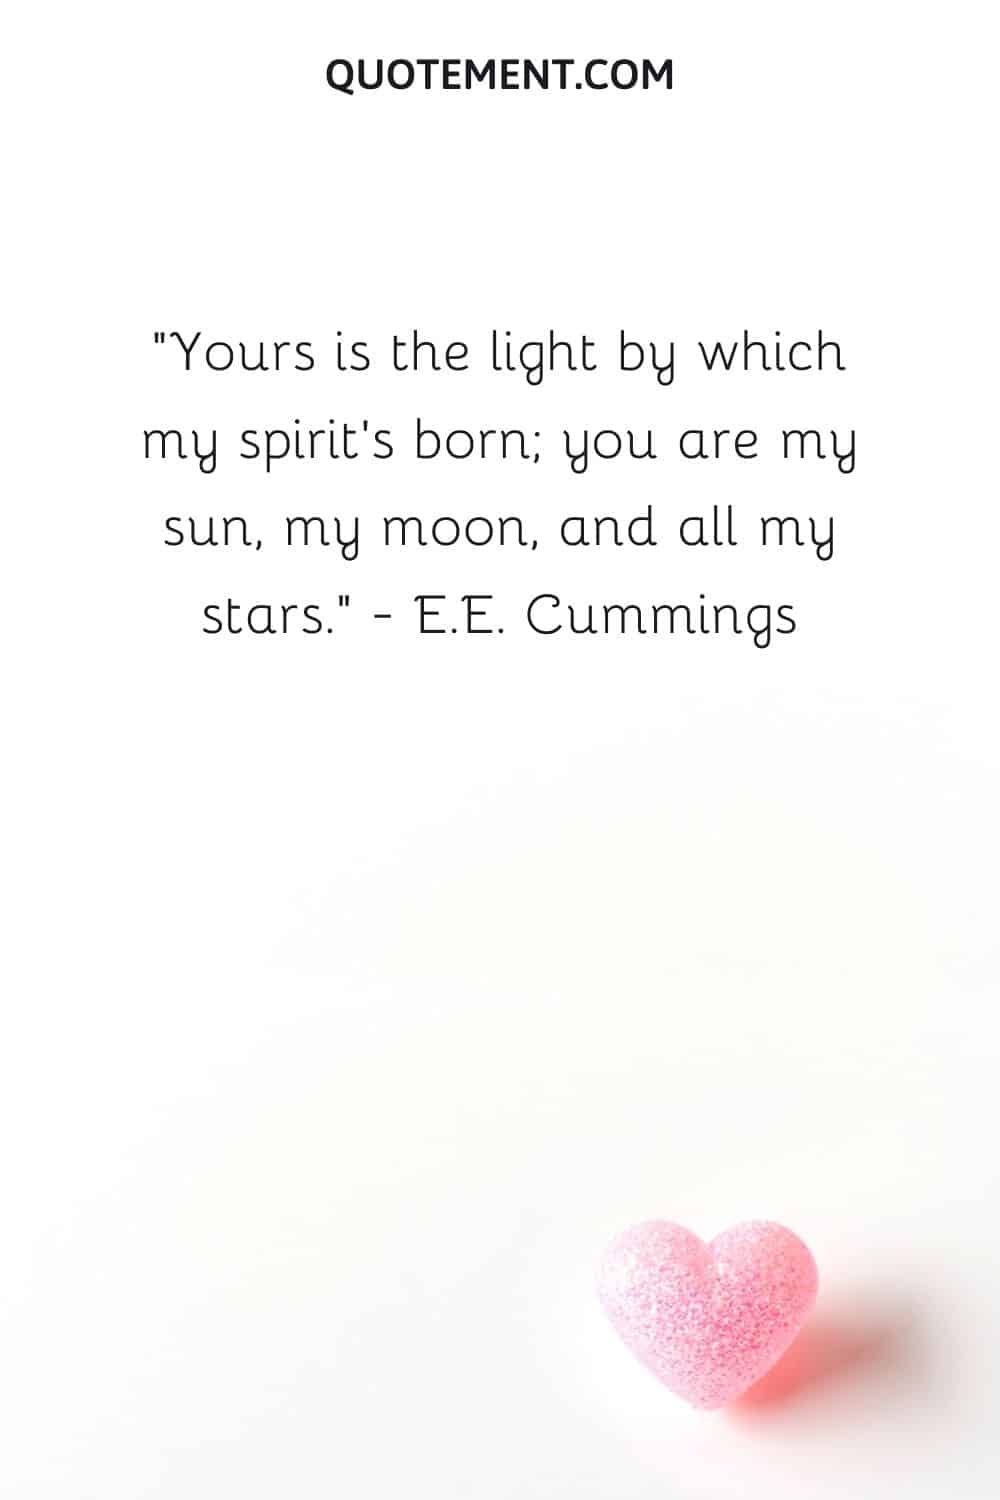 Yours is the light by which my spirit's born.